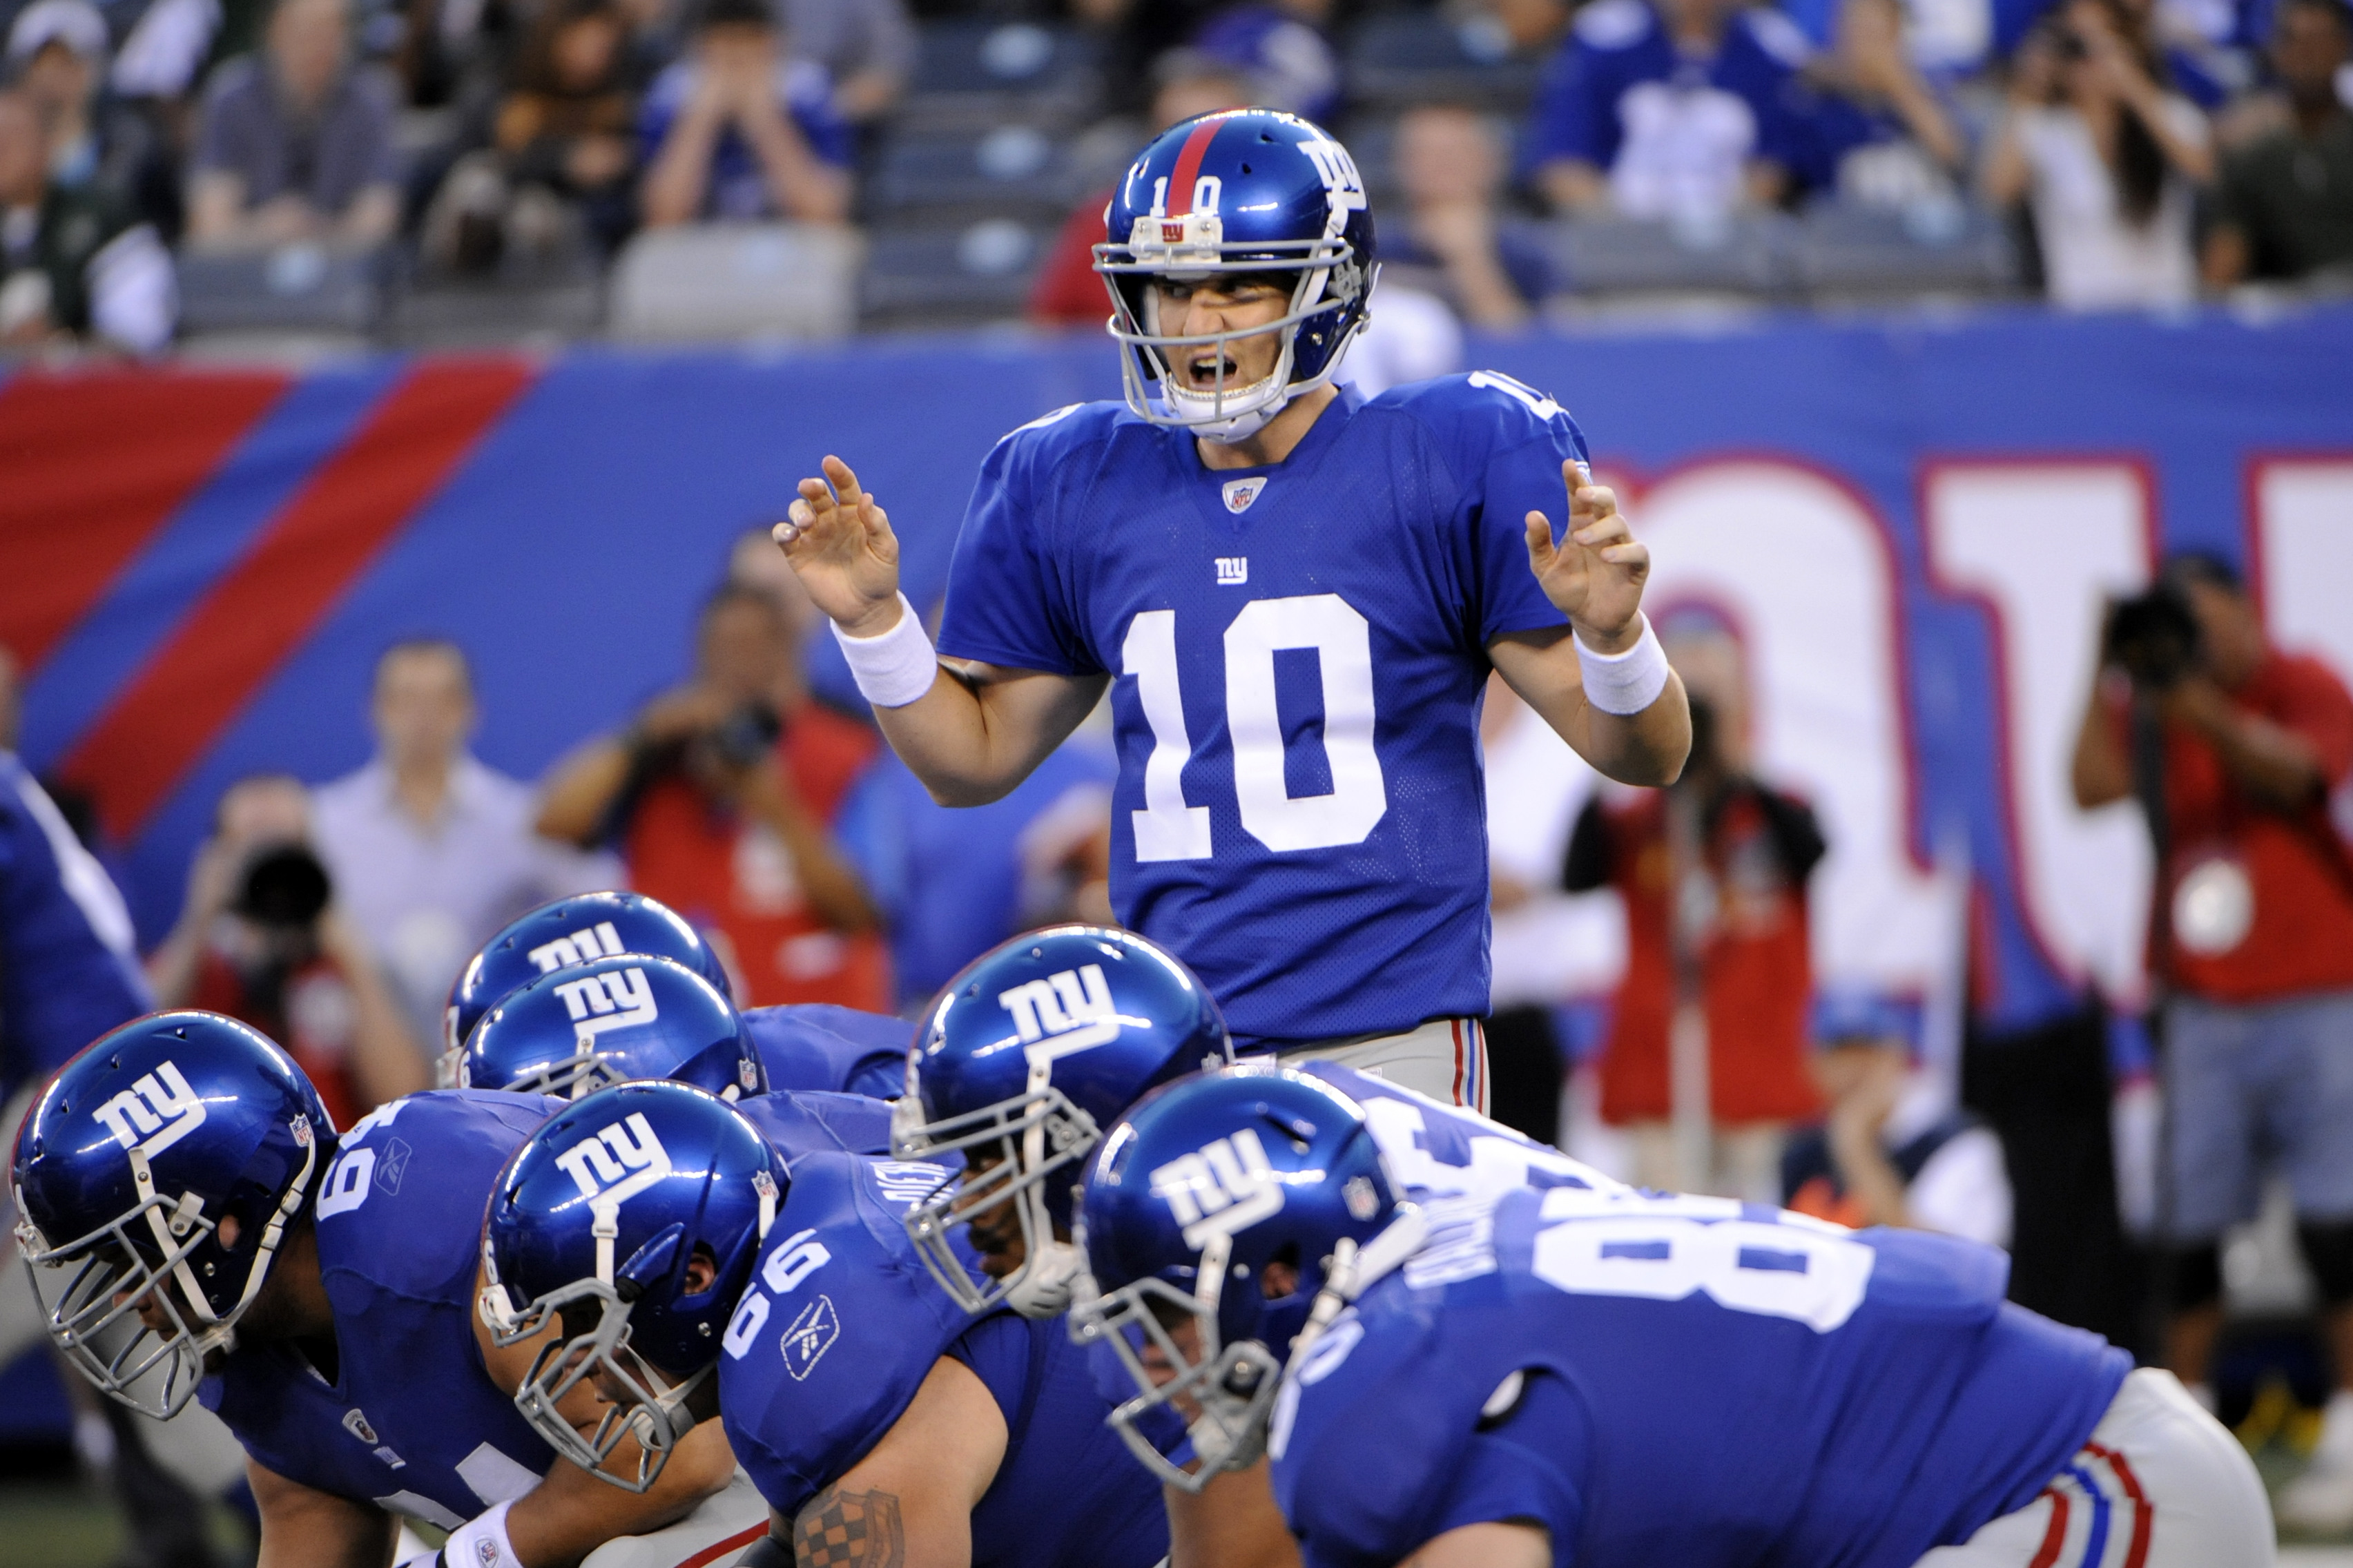 Football Giants pictures - Google Search | Sports | Pinterest | Nfl ...